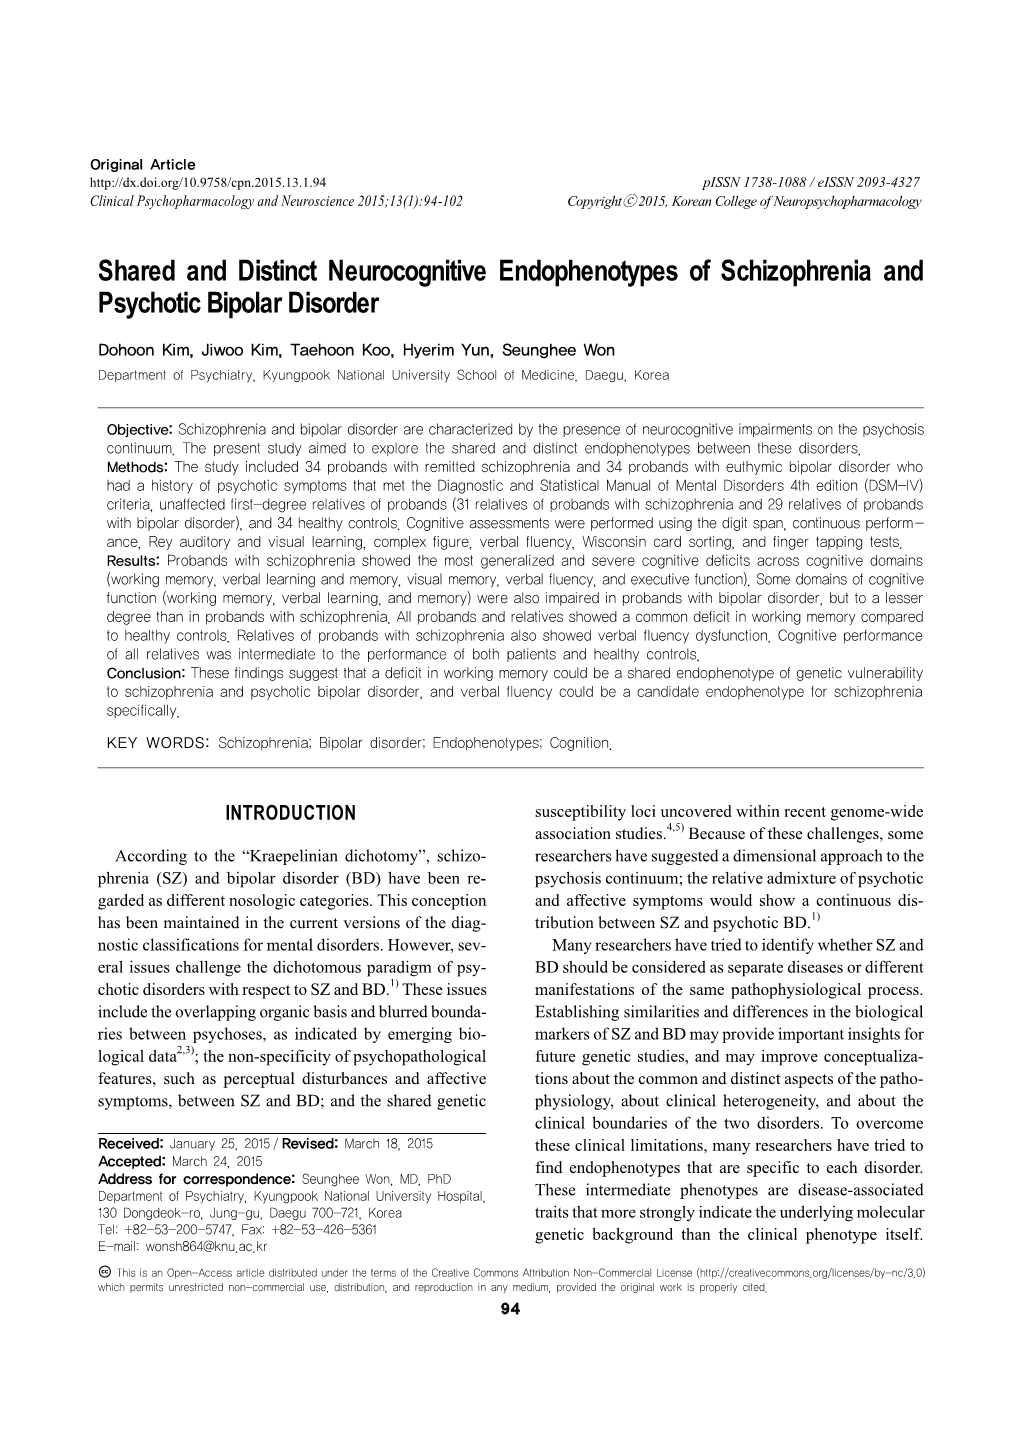 Shared and Distinct Neurocognitive Endophenotypes of Schizophrenia and Psychotic Bipolar Disorder